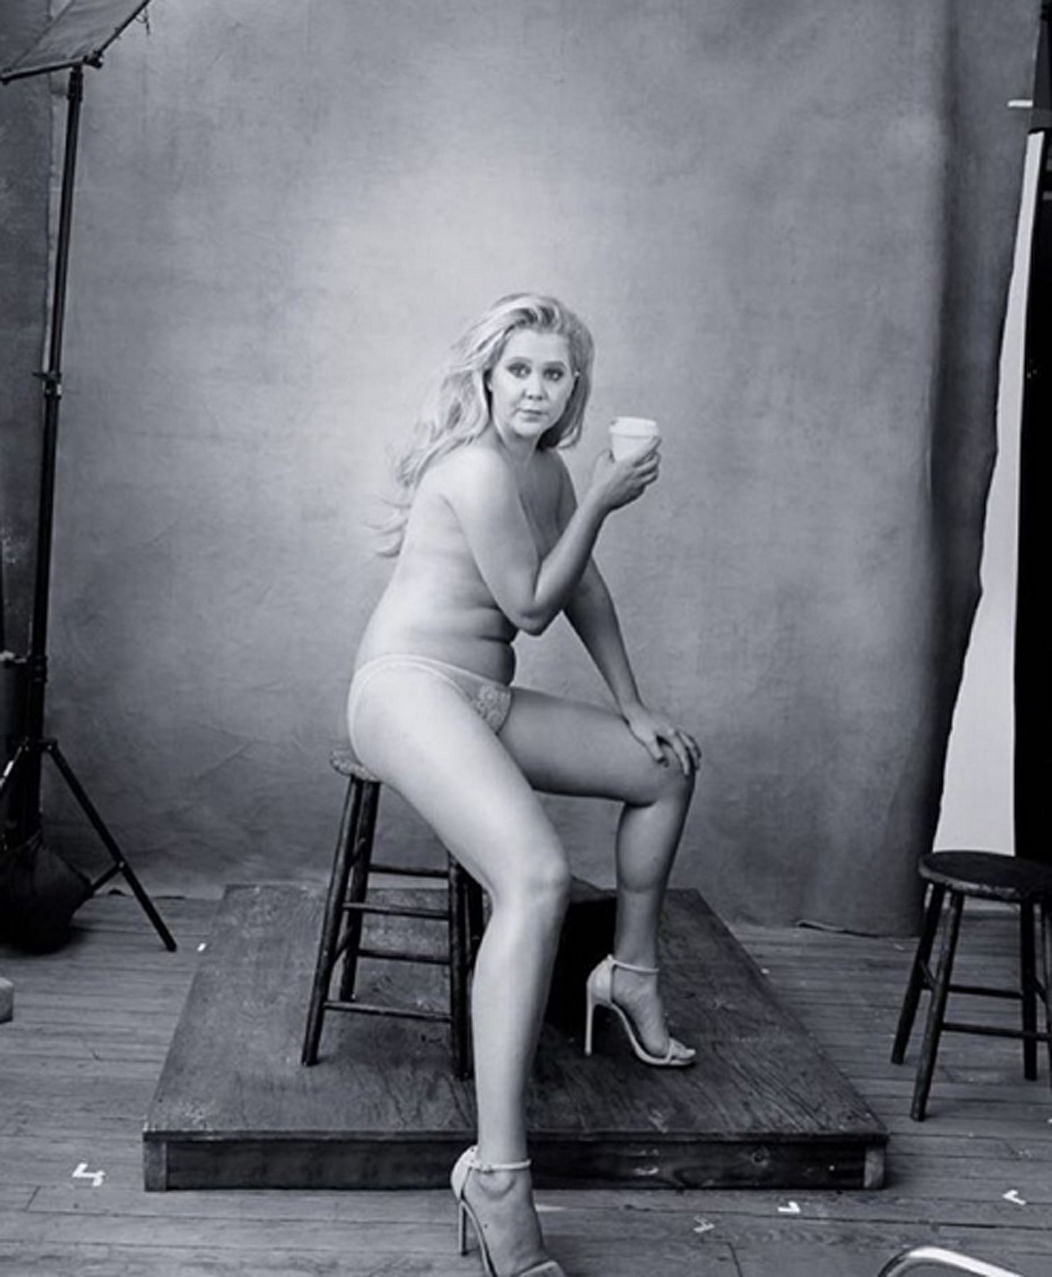 The Pirelli Calendar, 2016 is a paradigm shift from its usual format. Watch to believe.